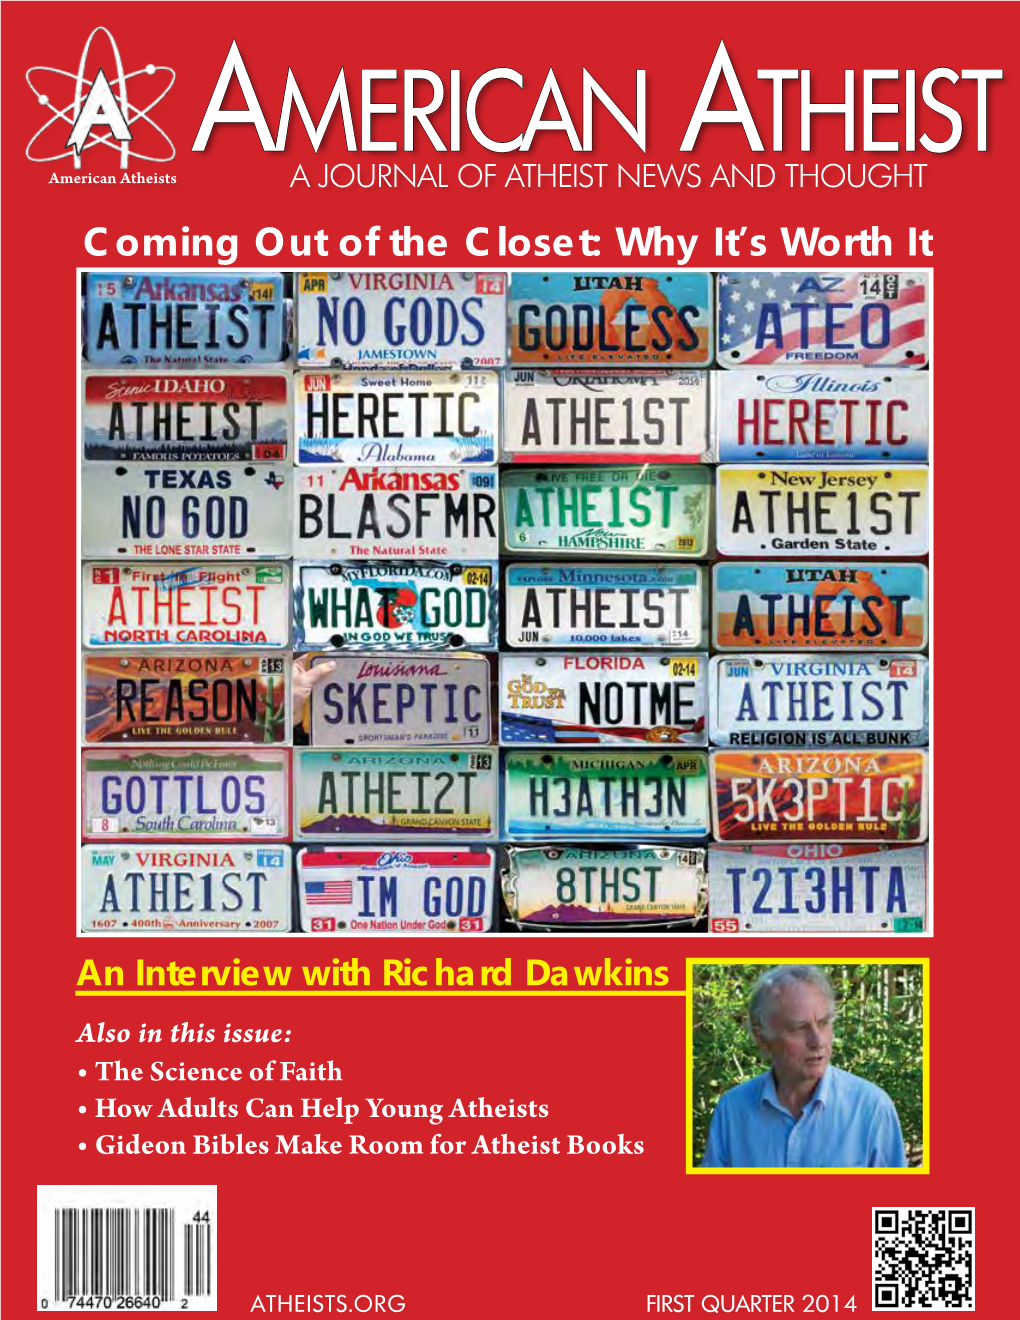 American Atheists a a a JOURNAL of ATHEIST NEWS and THOUGHT Coming out of the Closet: Why It’S Worth It